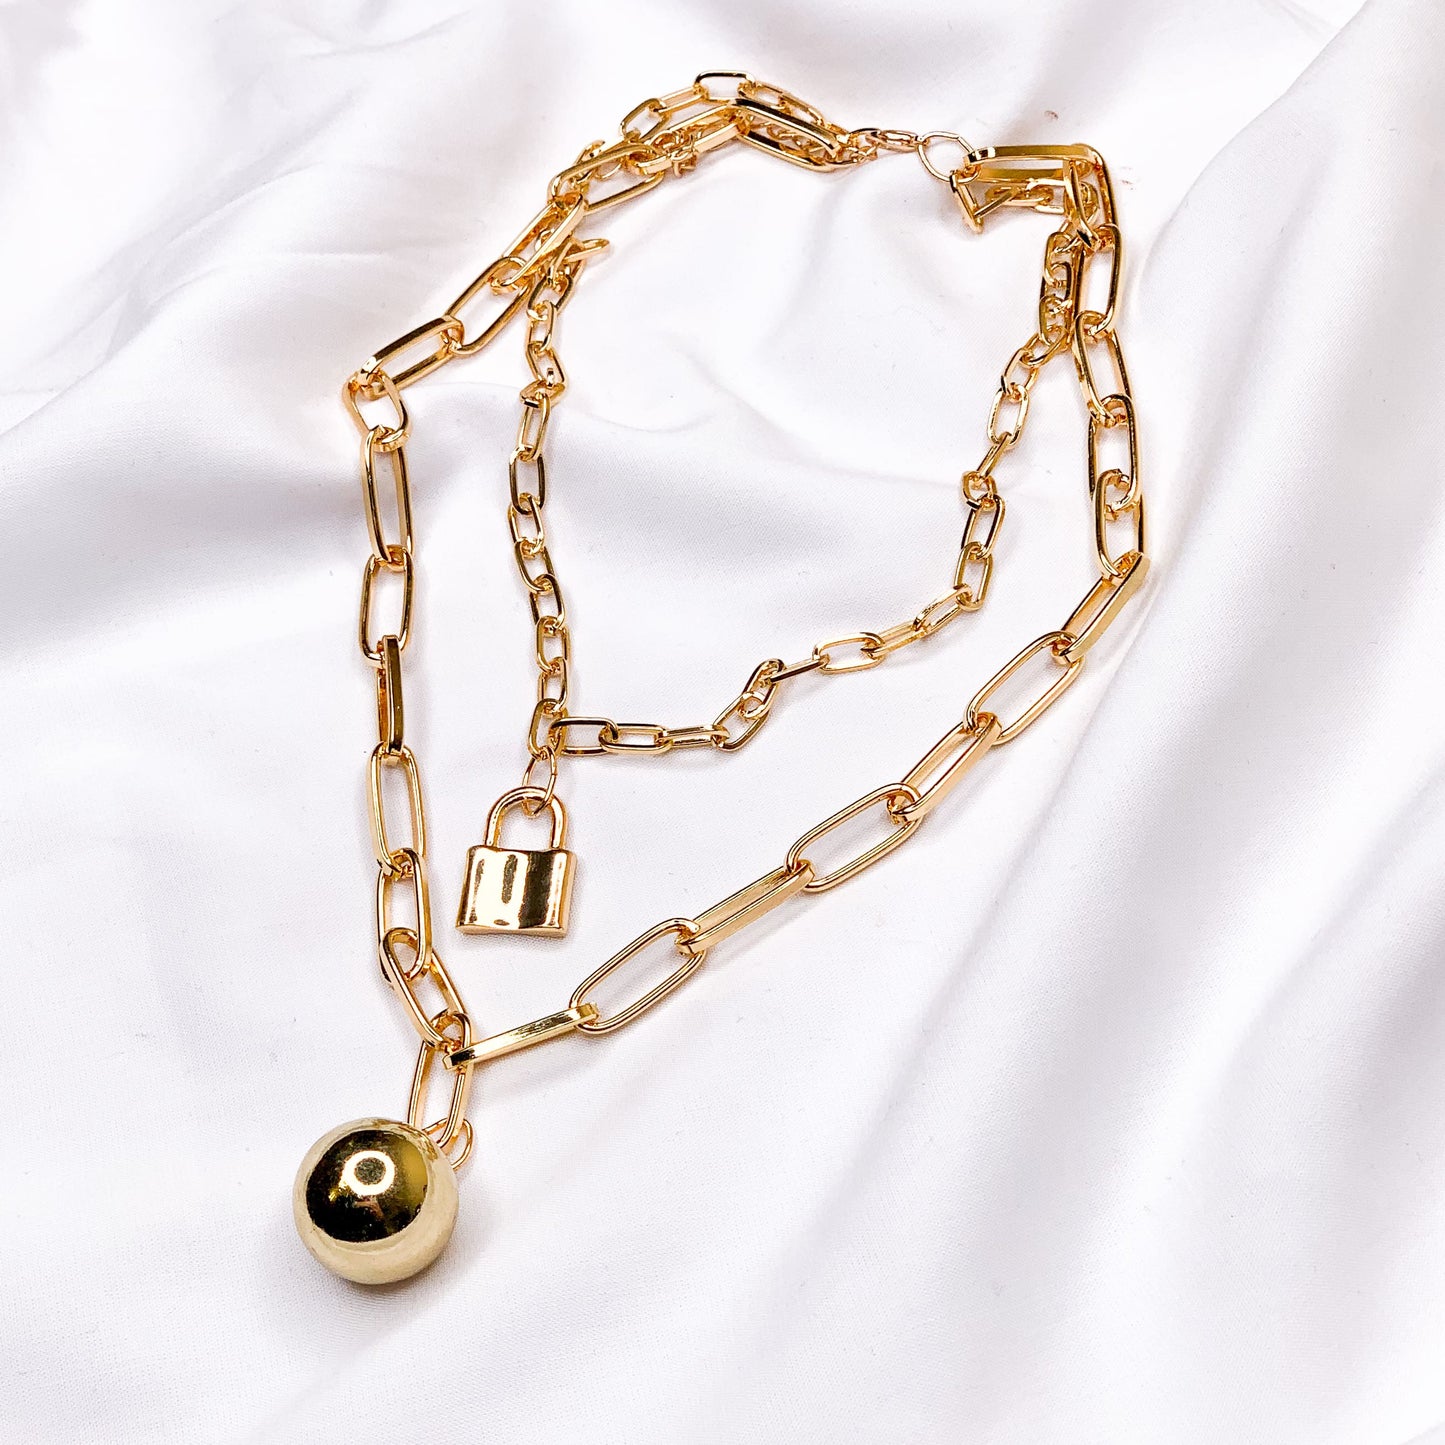 Chain necklace with ball and lock pendant